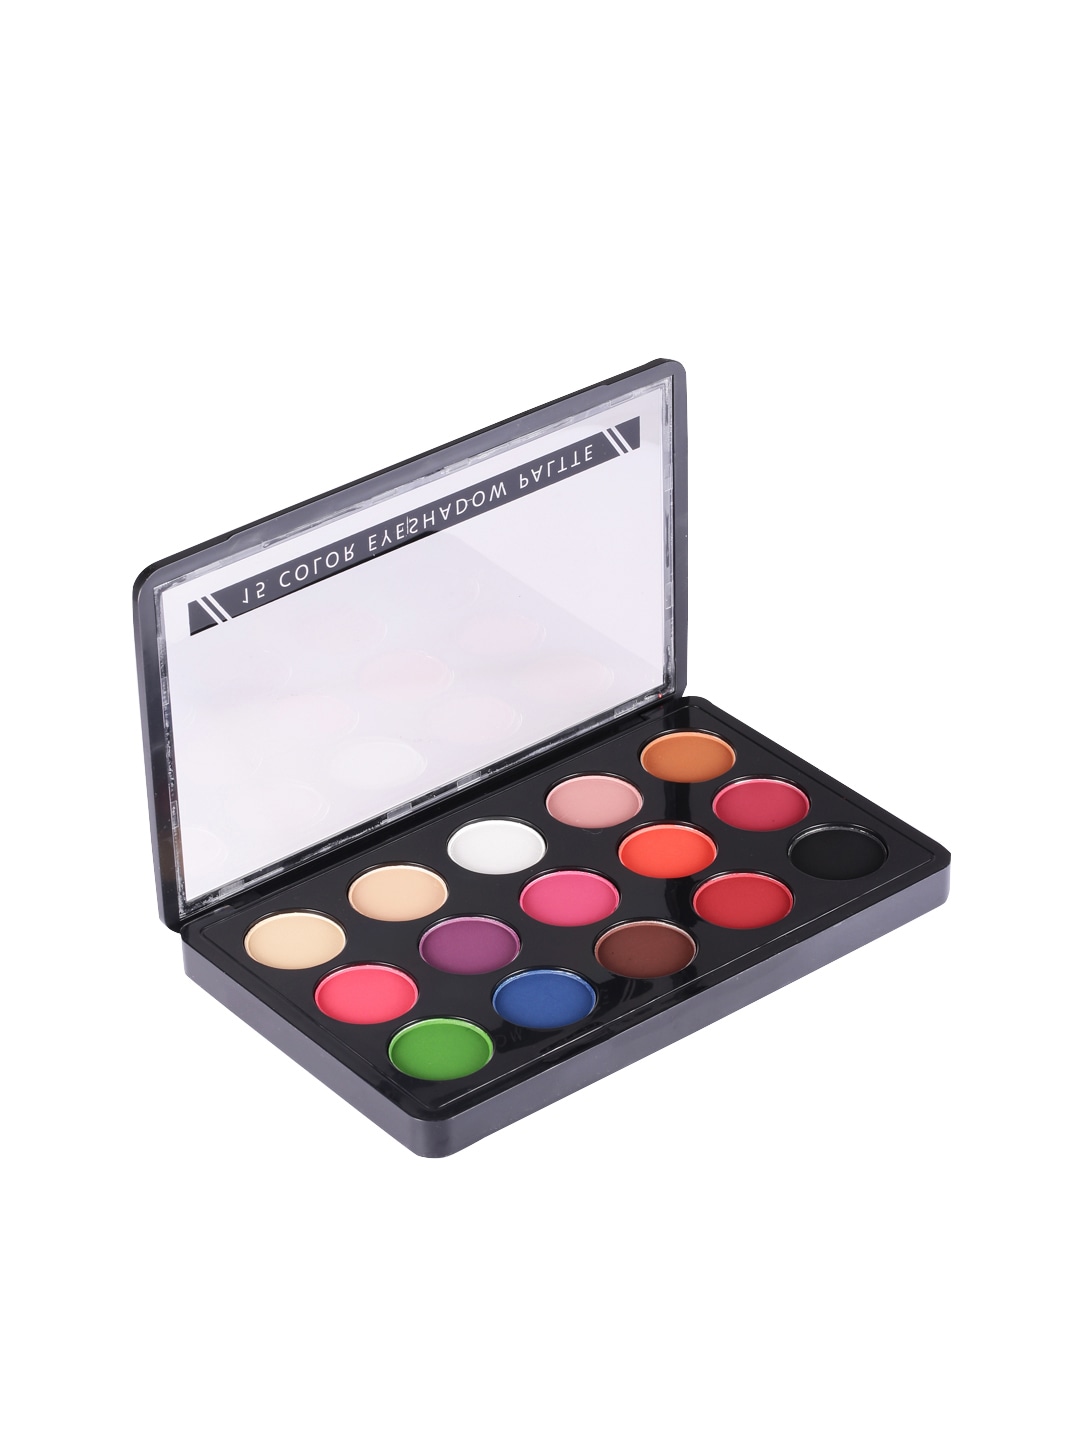 PAC 01 Subtle Beauty Ultra Eye Shadow Palette 30g Price in India